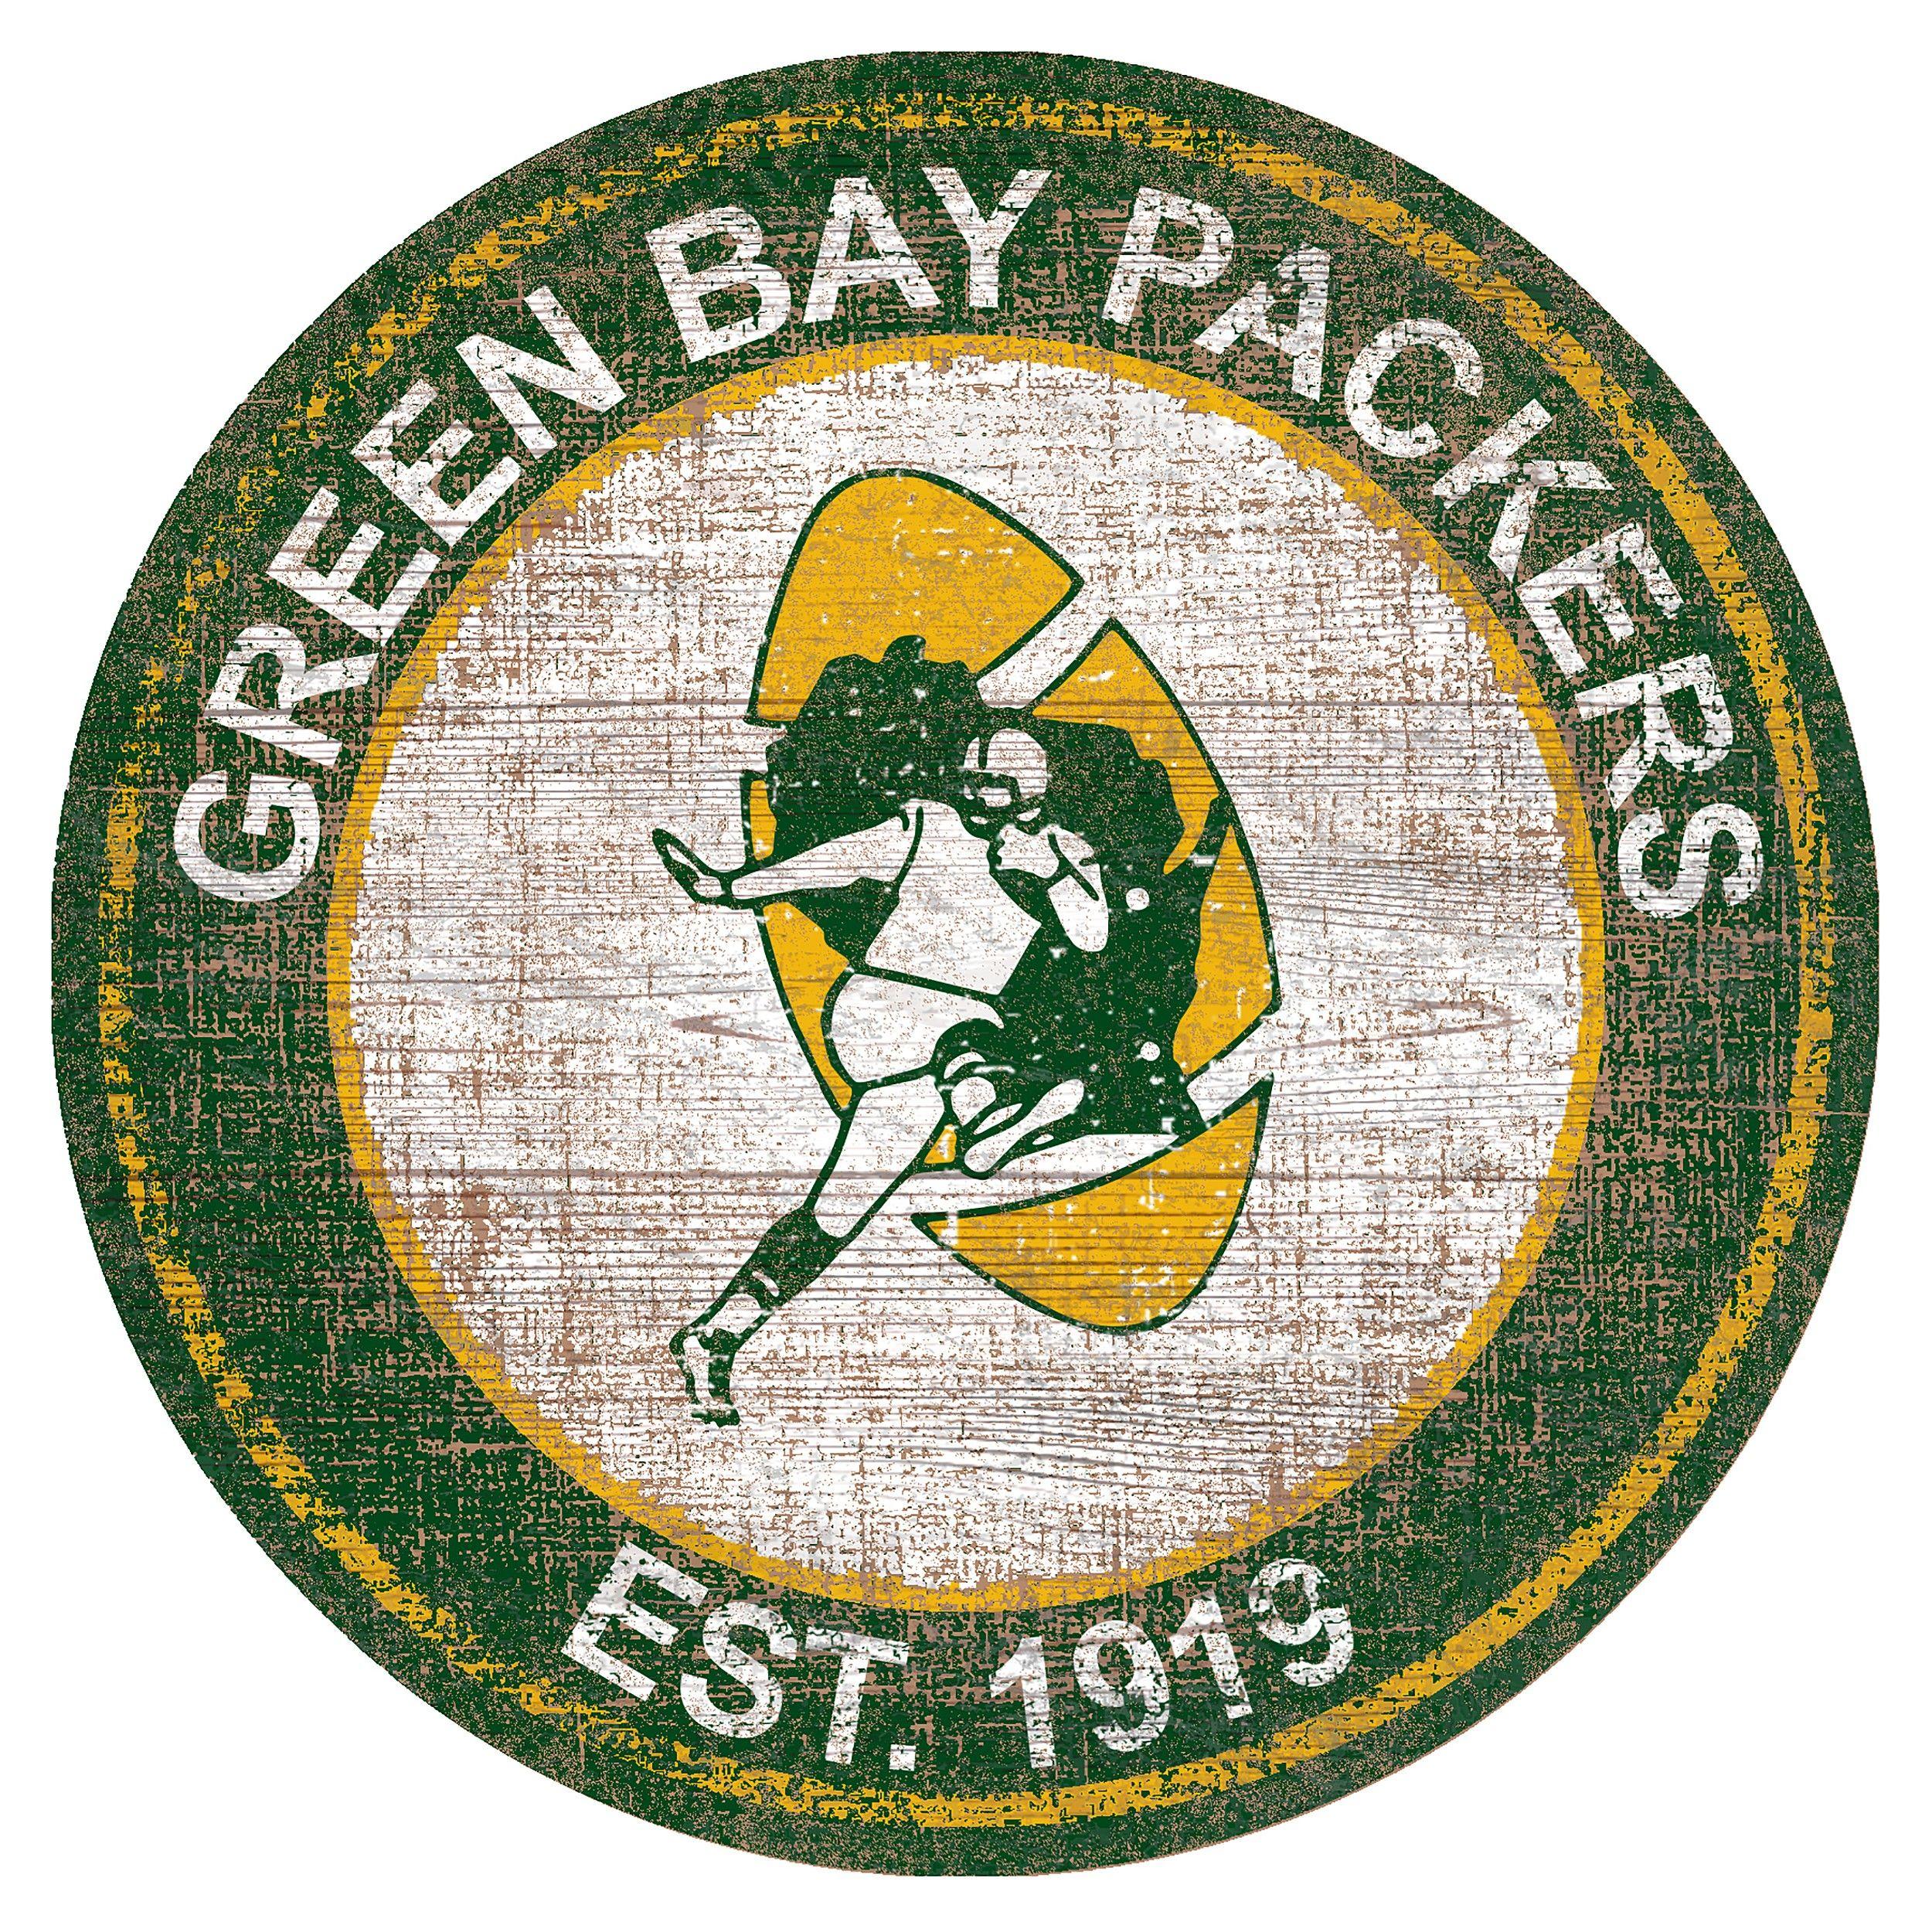 Round Green Logo - Green Bay Packers Heritage Logo Round Wood Sign at the Packers Pro Shop